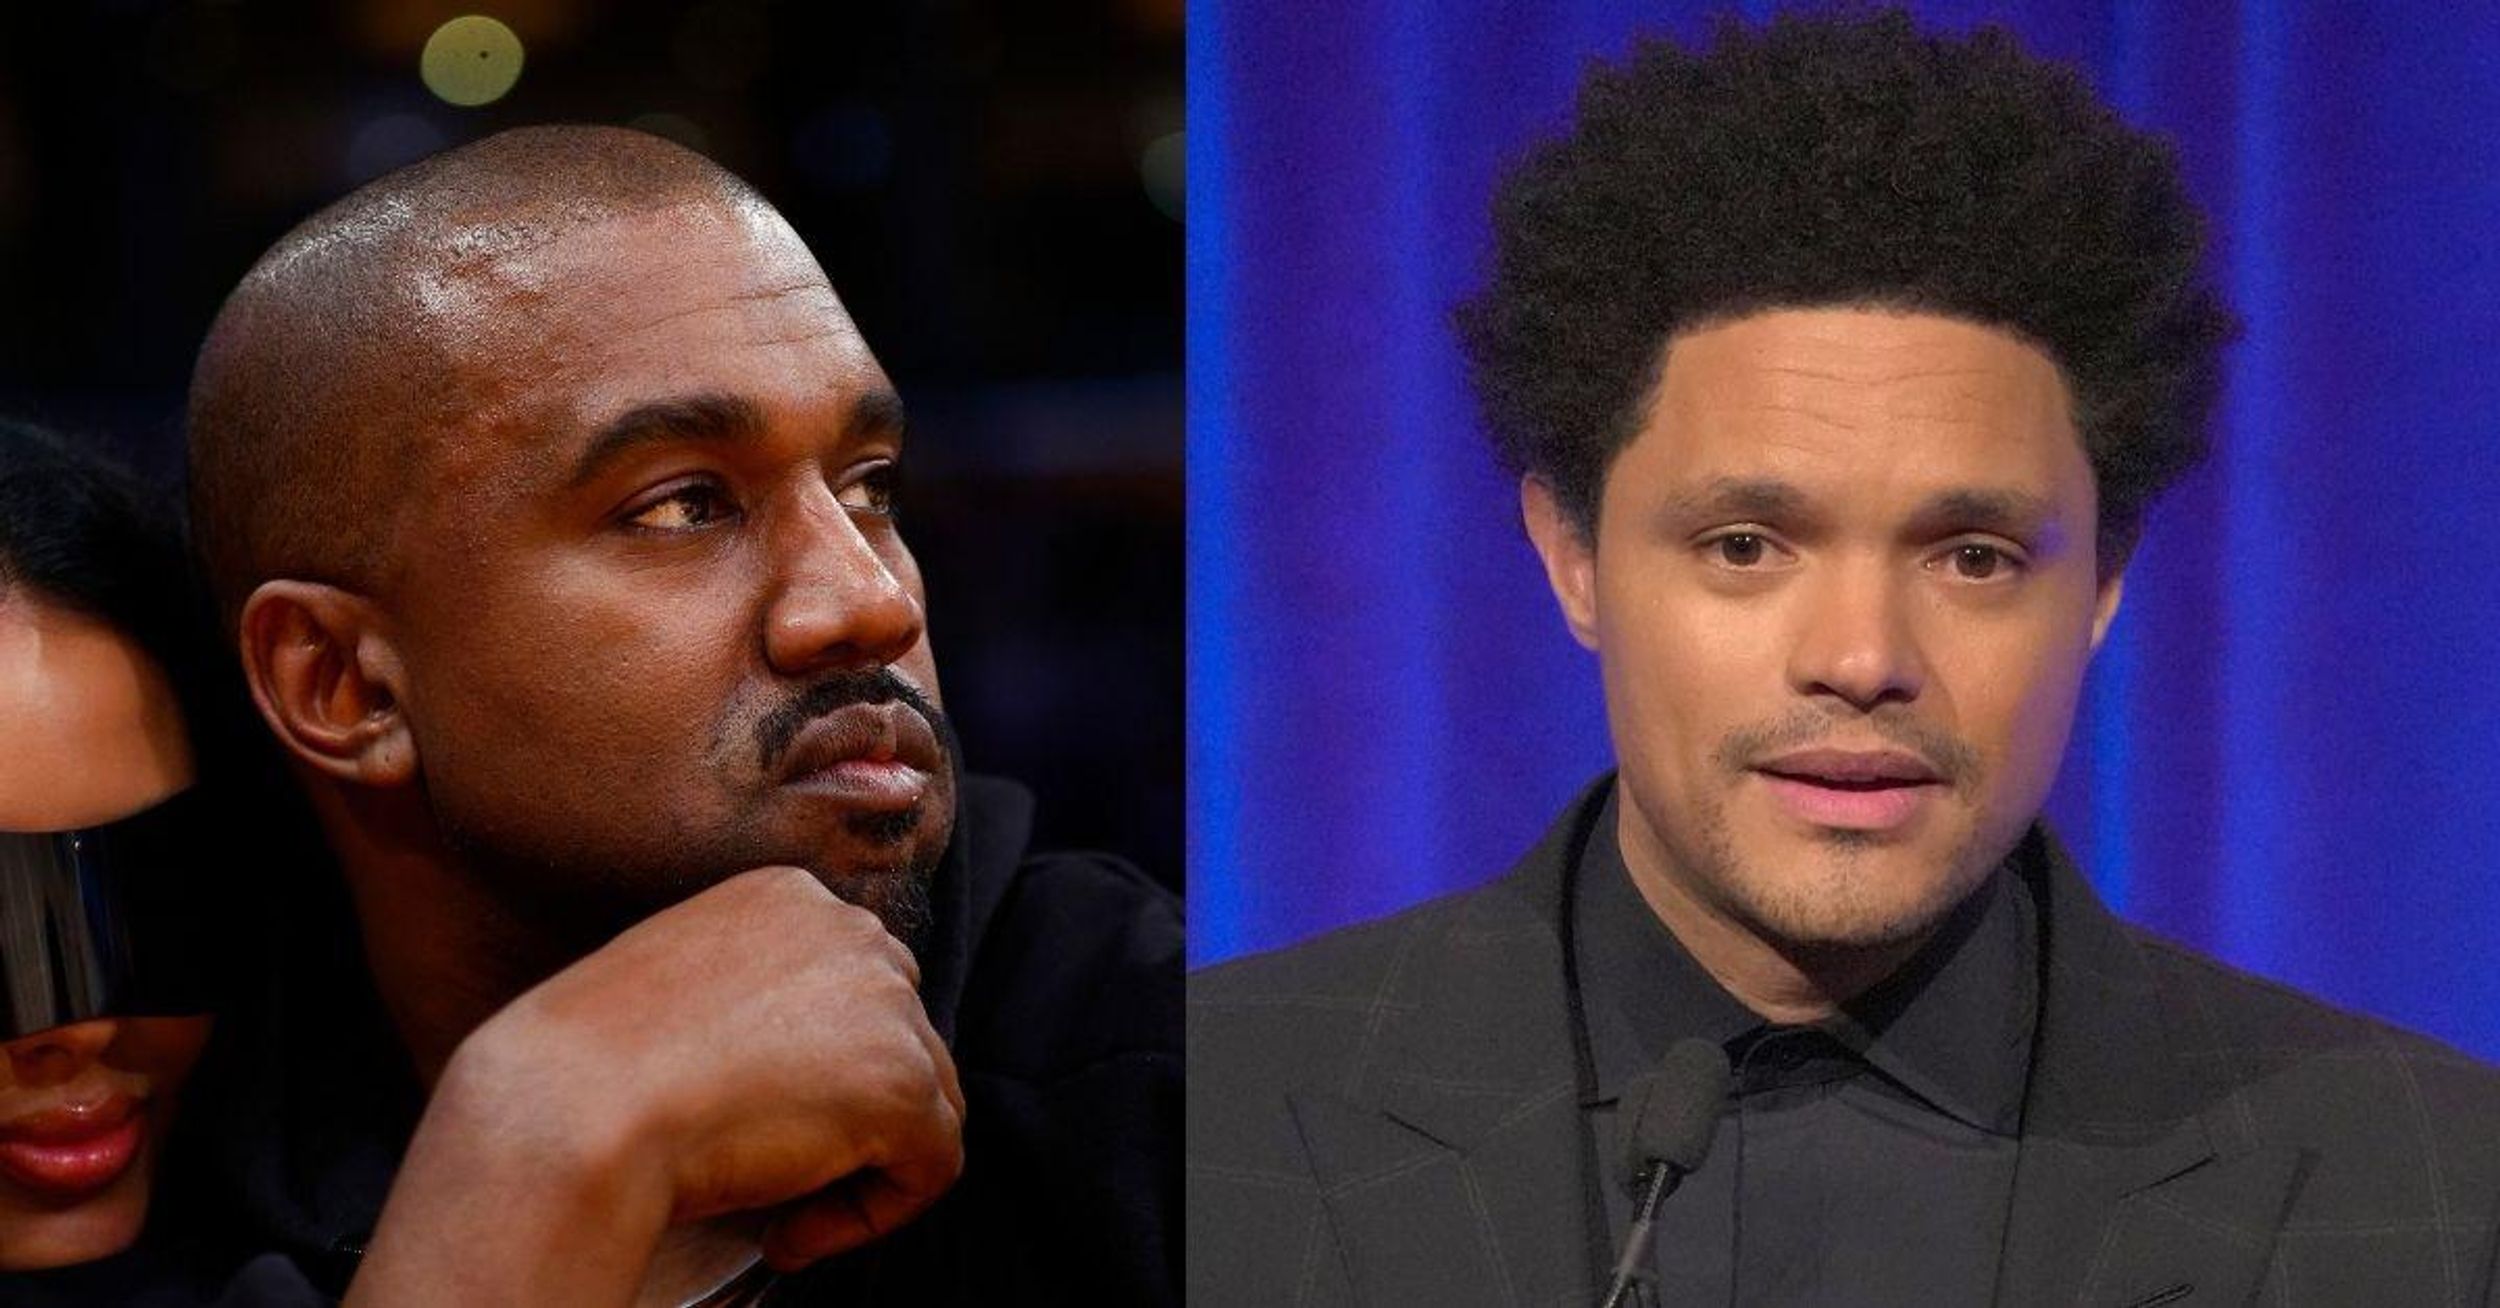 Ye Suspended From Instagram After Calling Trevor Noah A Racial Slur For Criticizing His Behavior